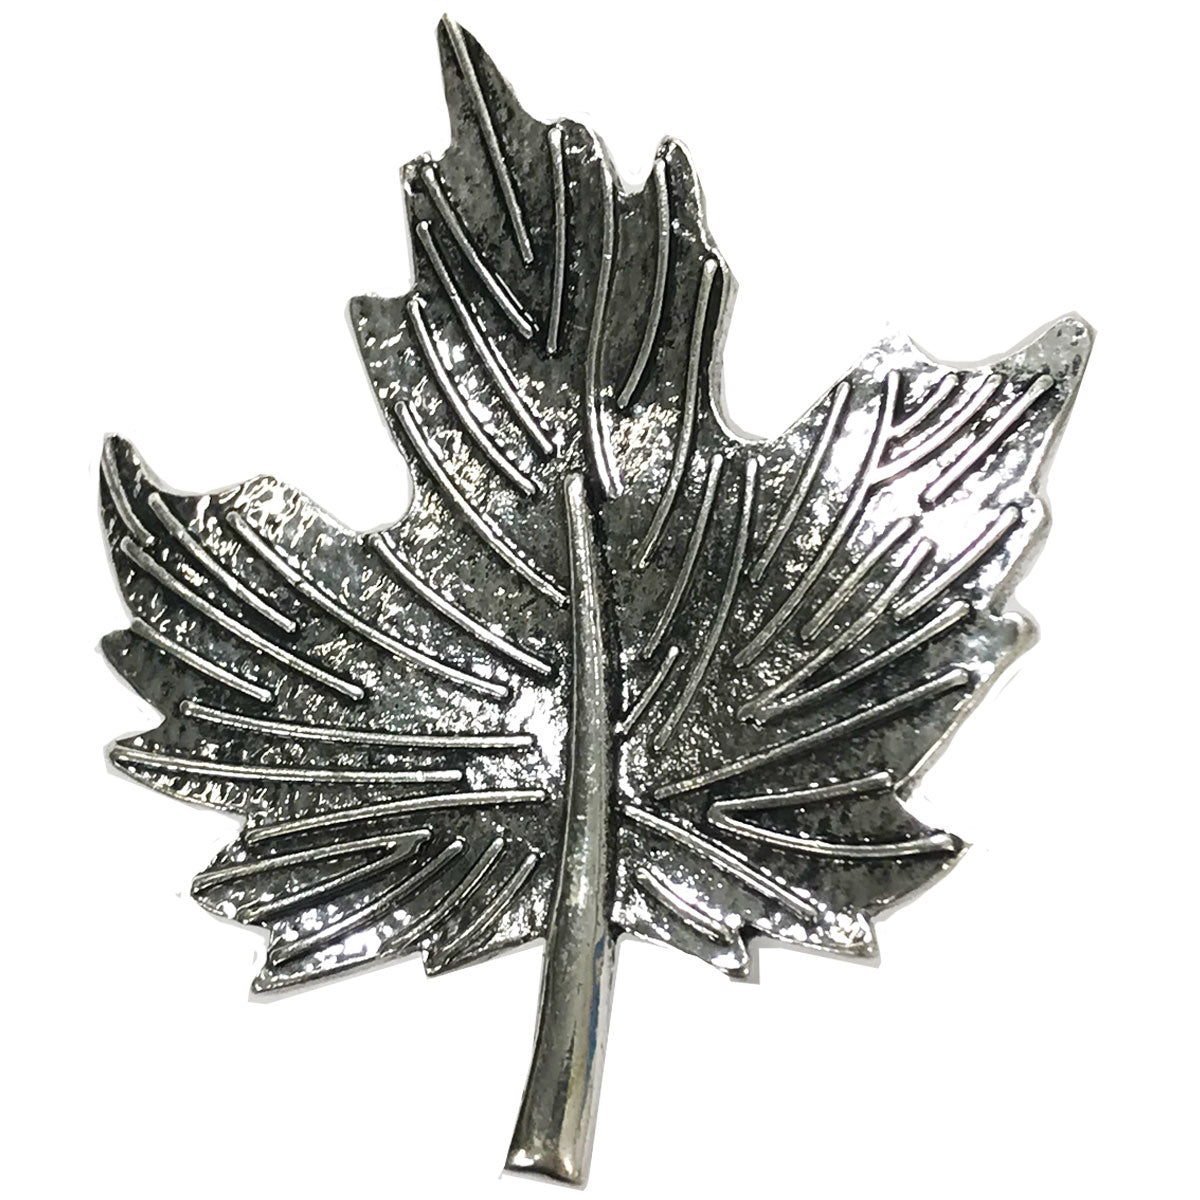 Silver maple leaf, Magnetic Brooch for Scarves Artistic Sculptural shapes add a personality to absolutely anything you wish to put your stamp on! The Super Strong Magnet is enough for a jacket lapel! Use to hold a sarong or cardigan together.  Great to adorn a hat or to hold a scarf in place with Fabric Safe Magnet.